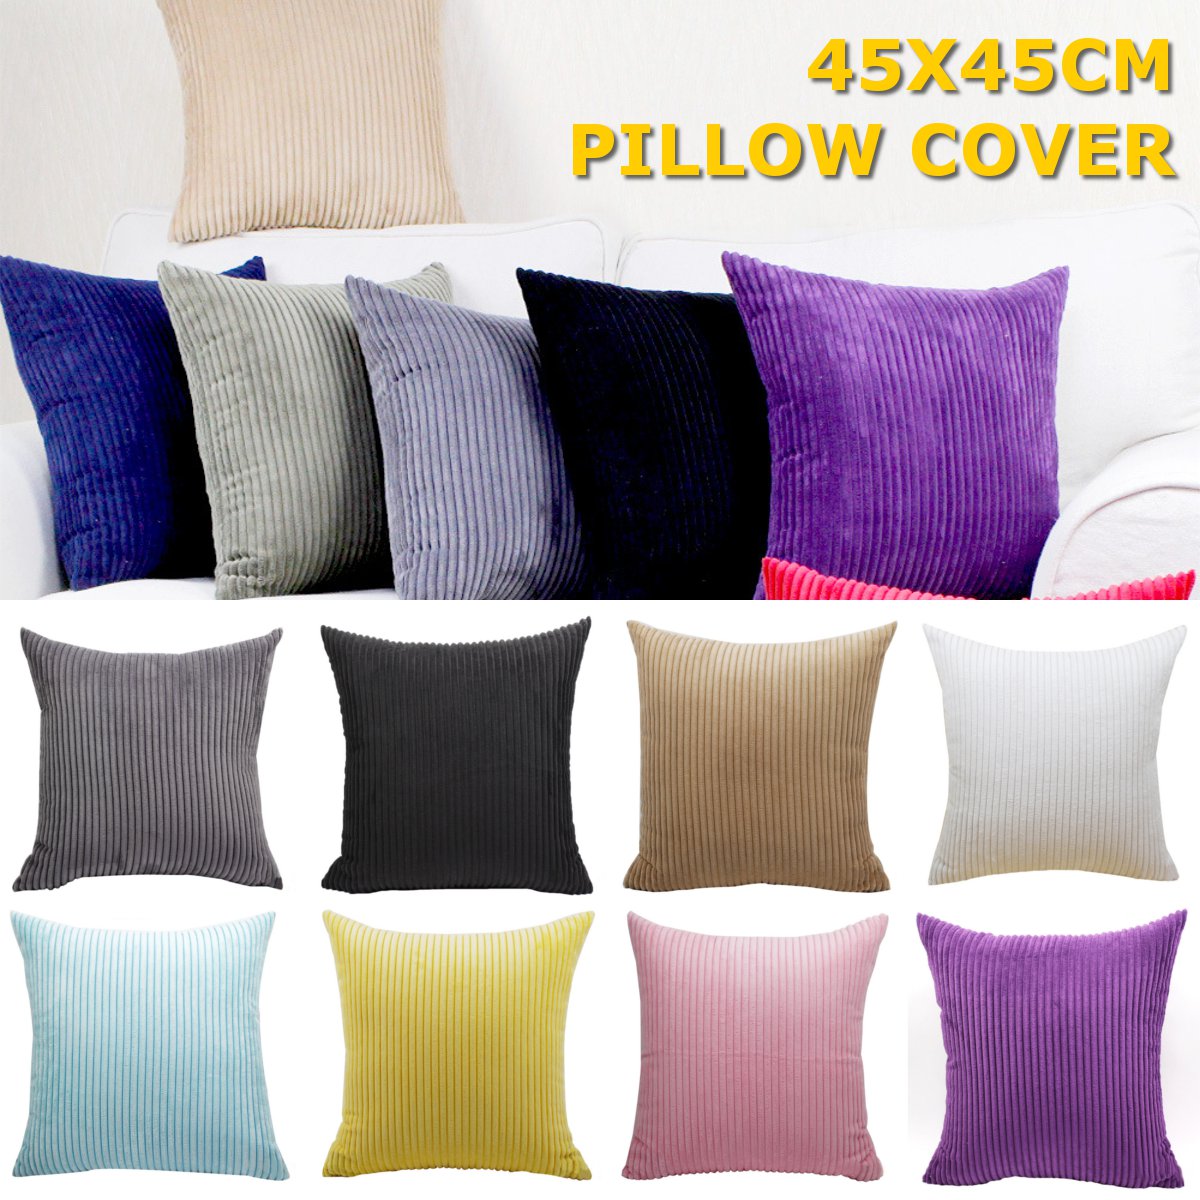 45X45cm-Corduroy-Pillow-Case-Colorful-Cushion-Cover-Throw-Home-Sofa-Decorations-1518541-1